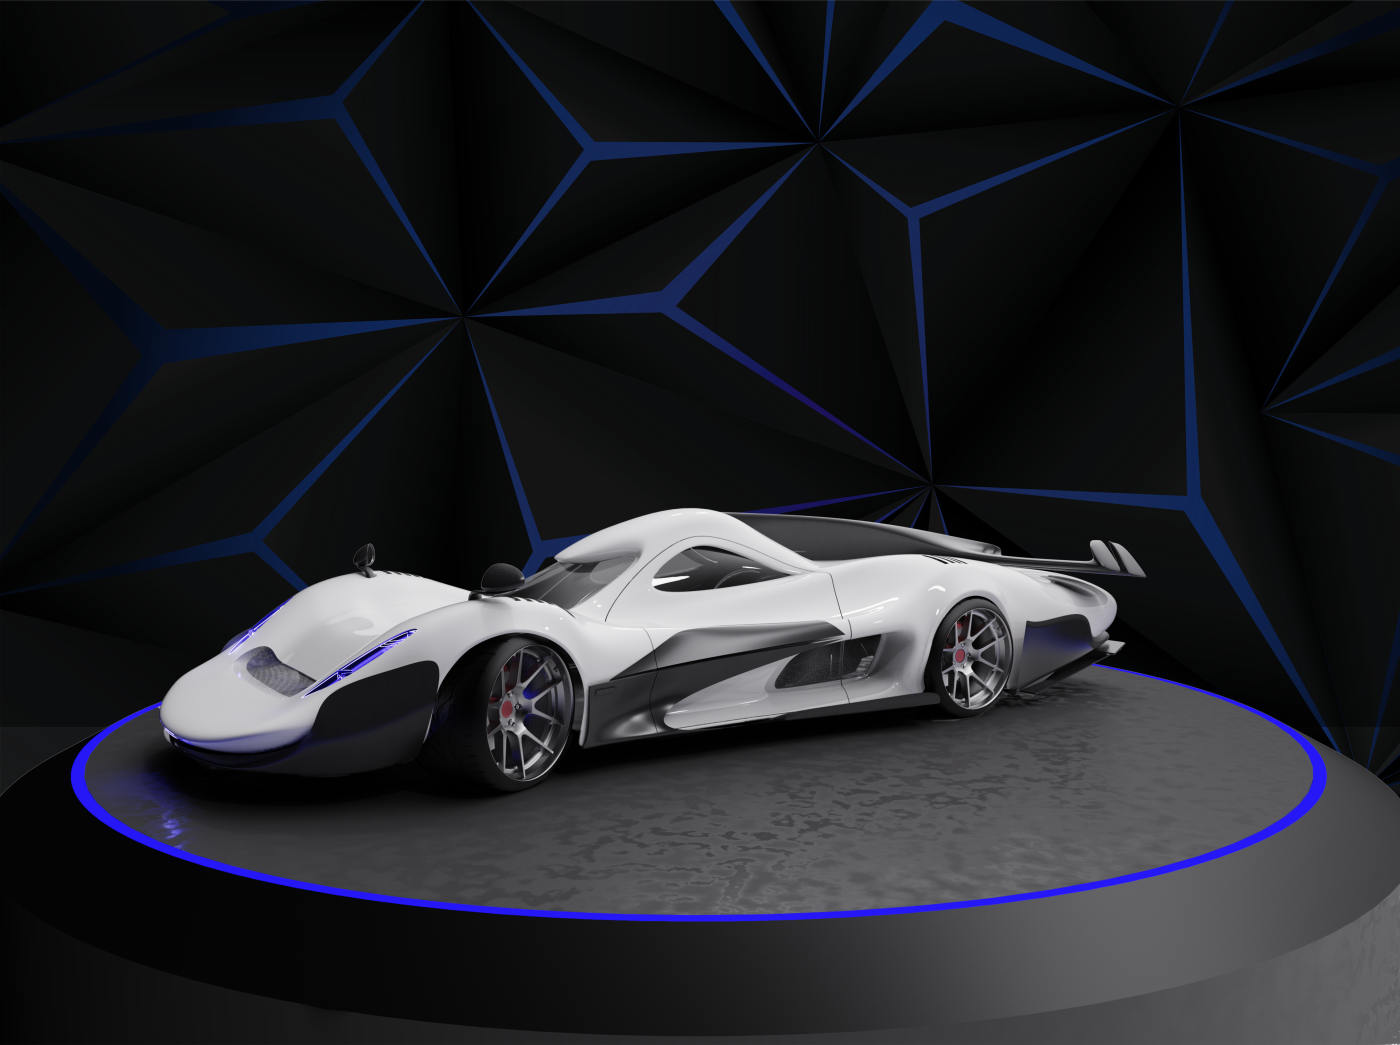 car hypercar speed 3D 3d modeling design product design  race black and white track